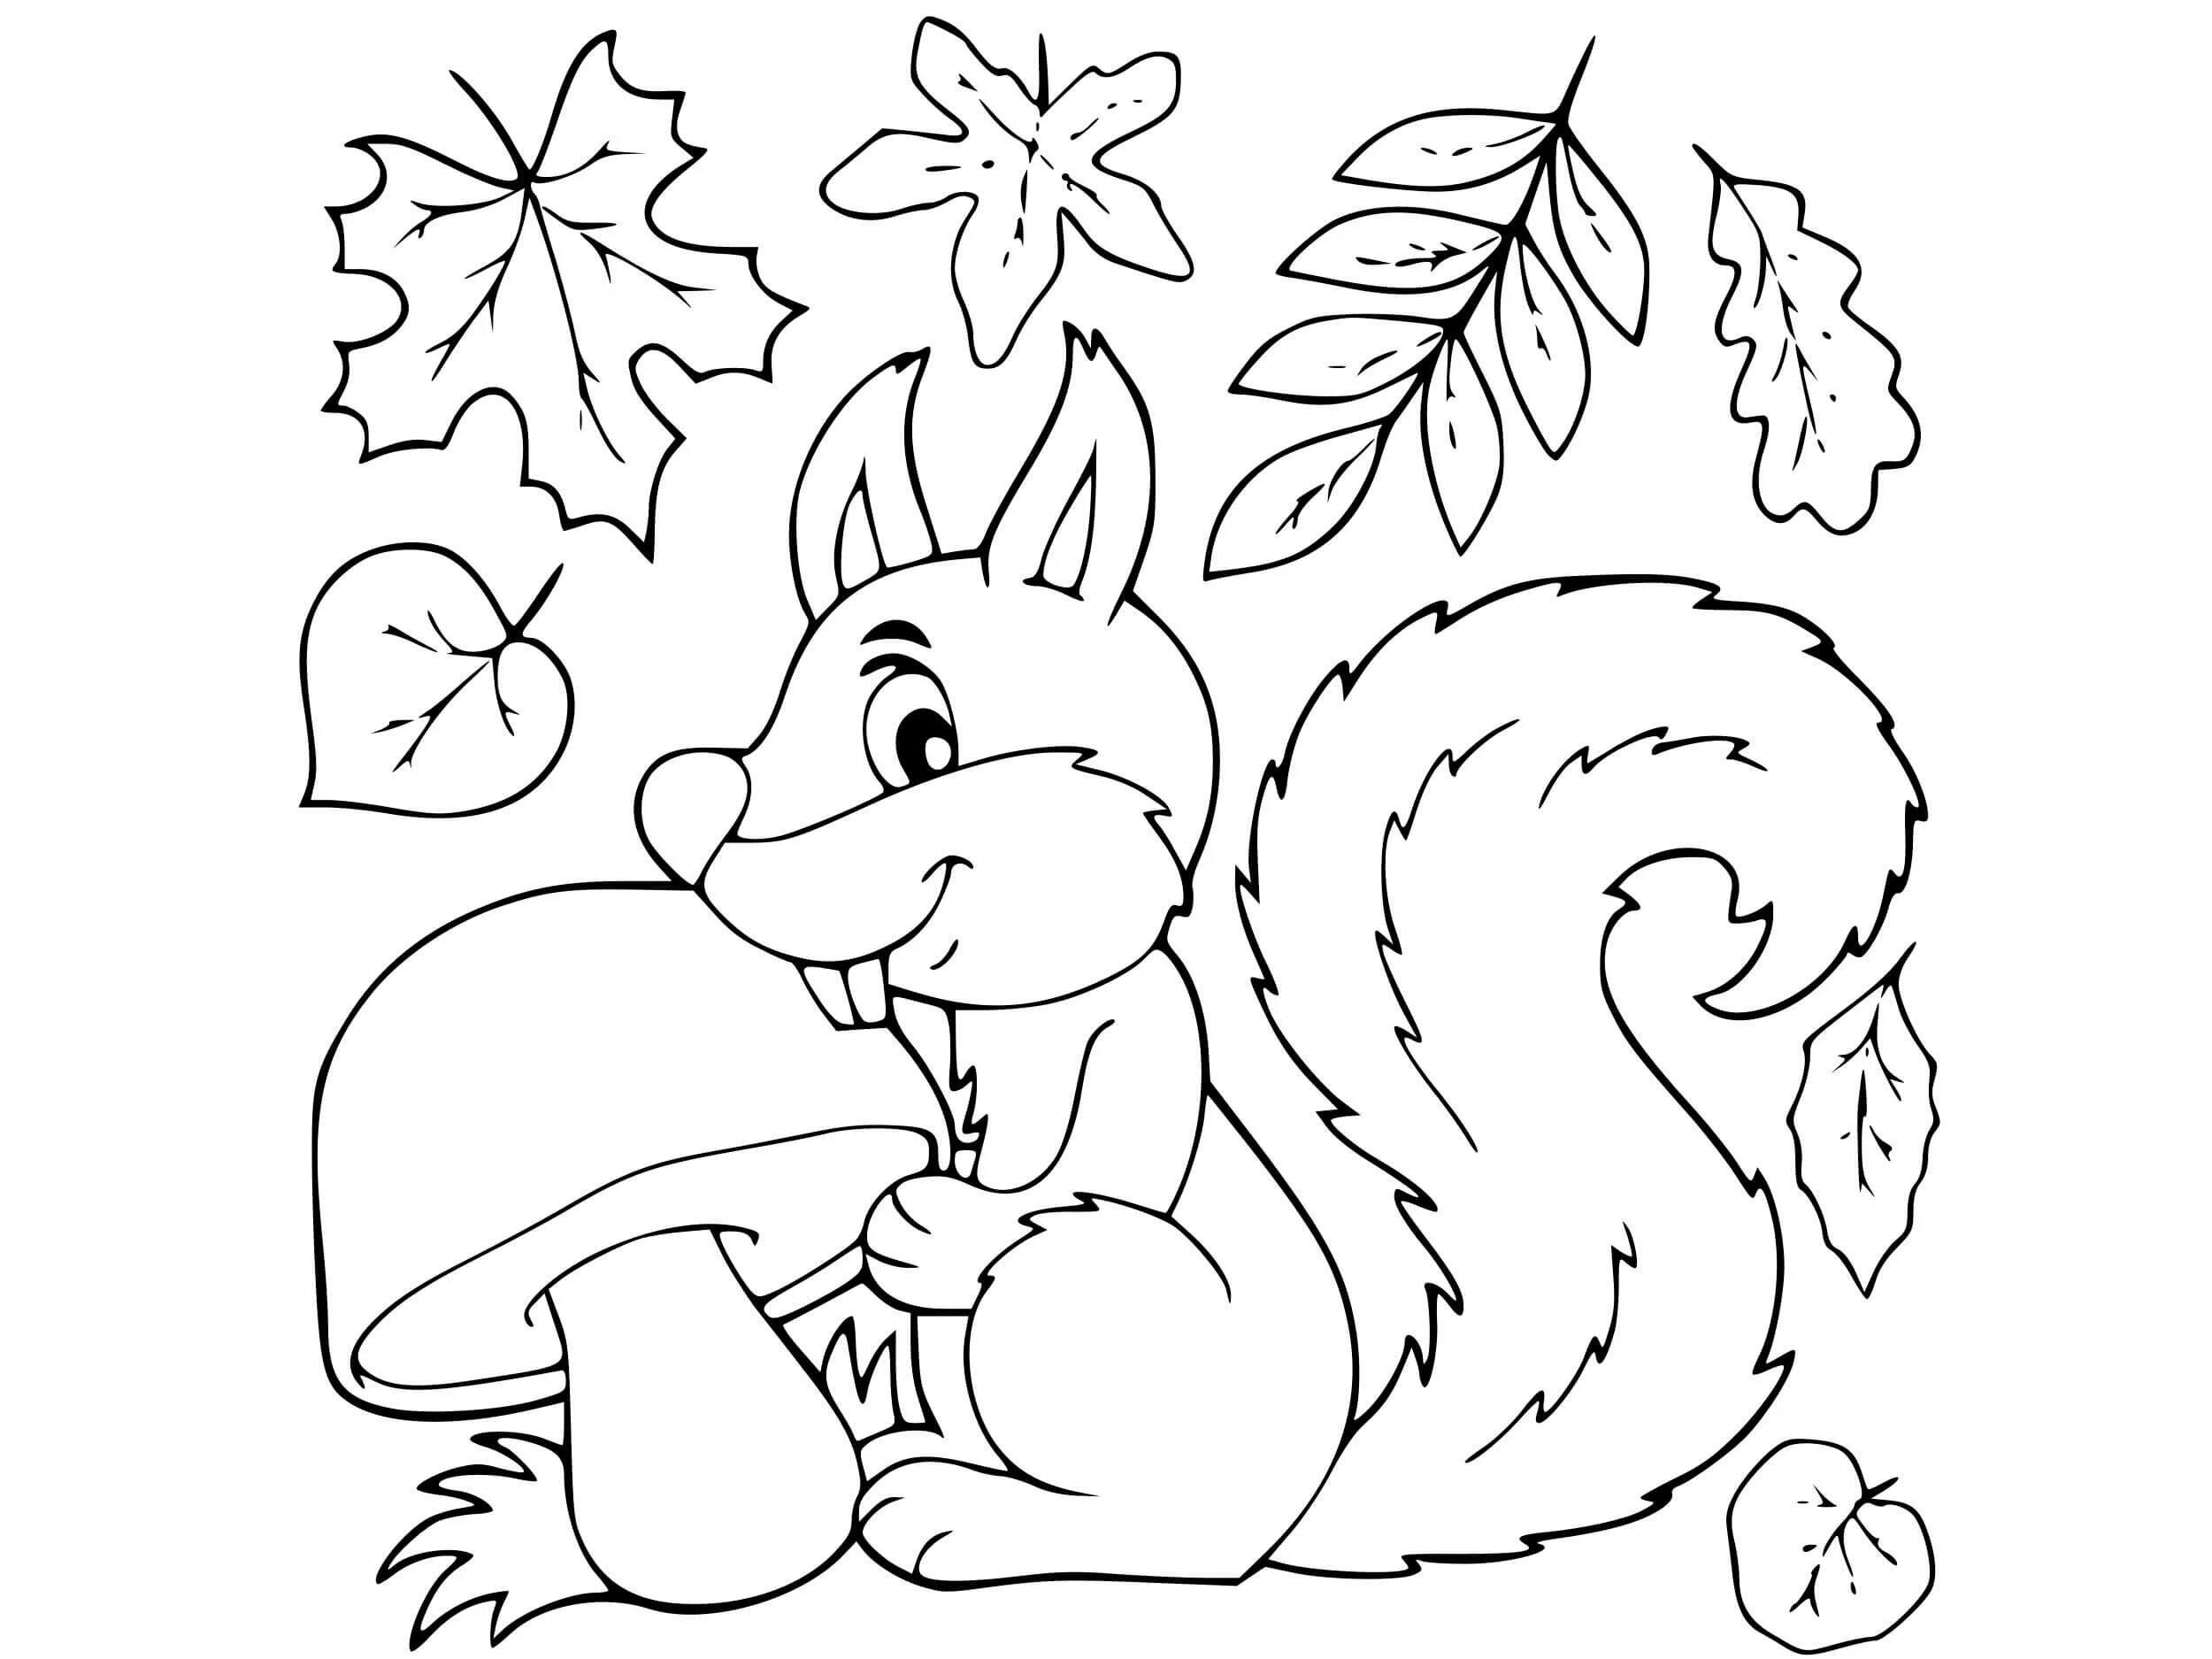 Color-frenzy squirrel coloring book for children 6-7 years old